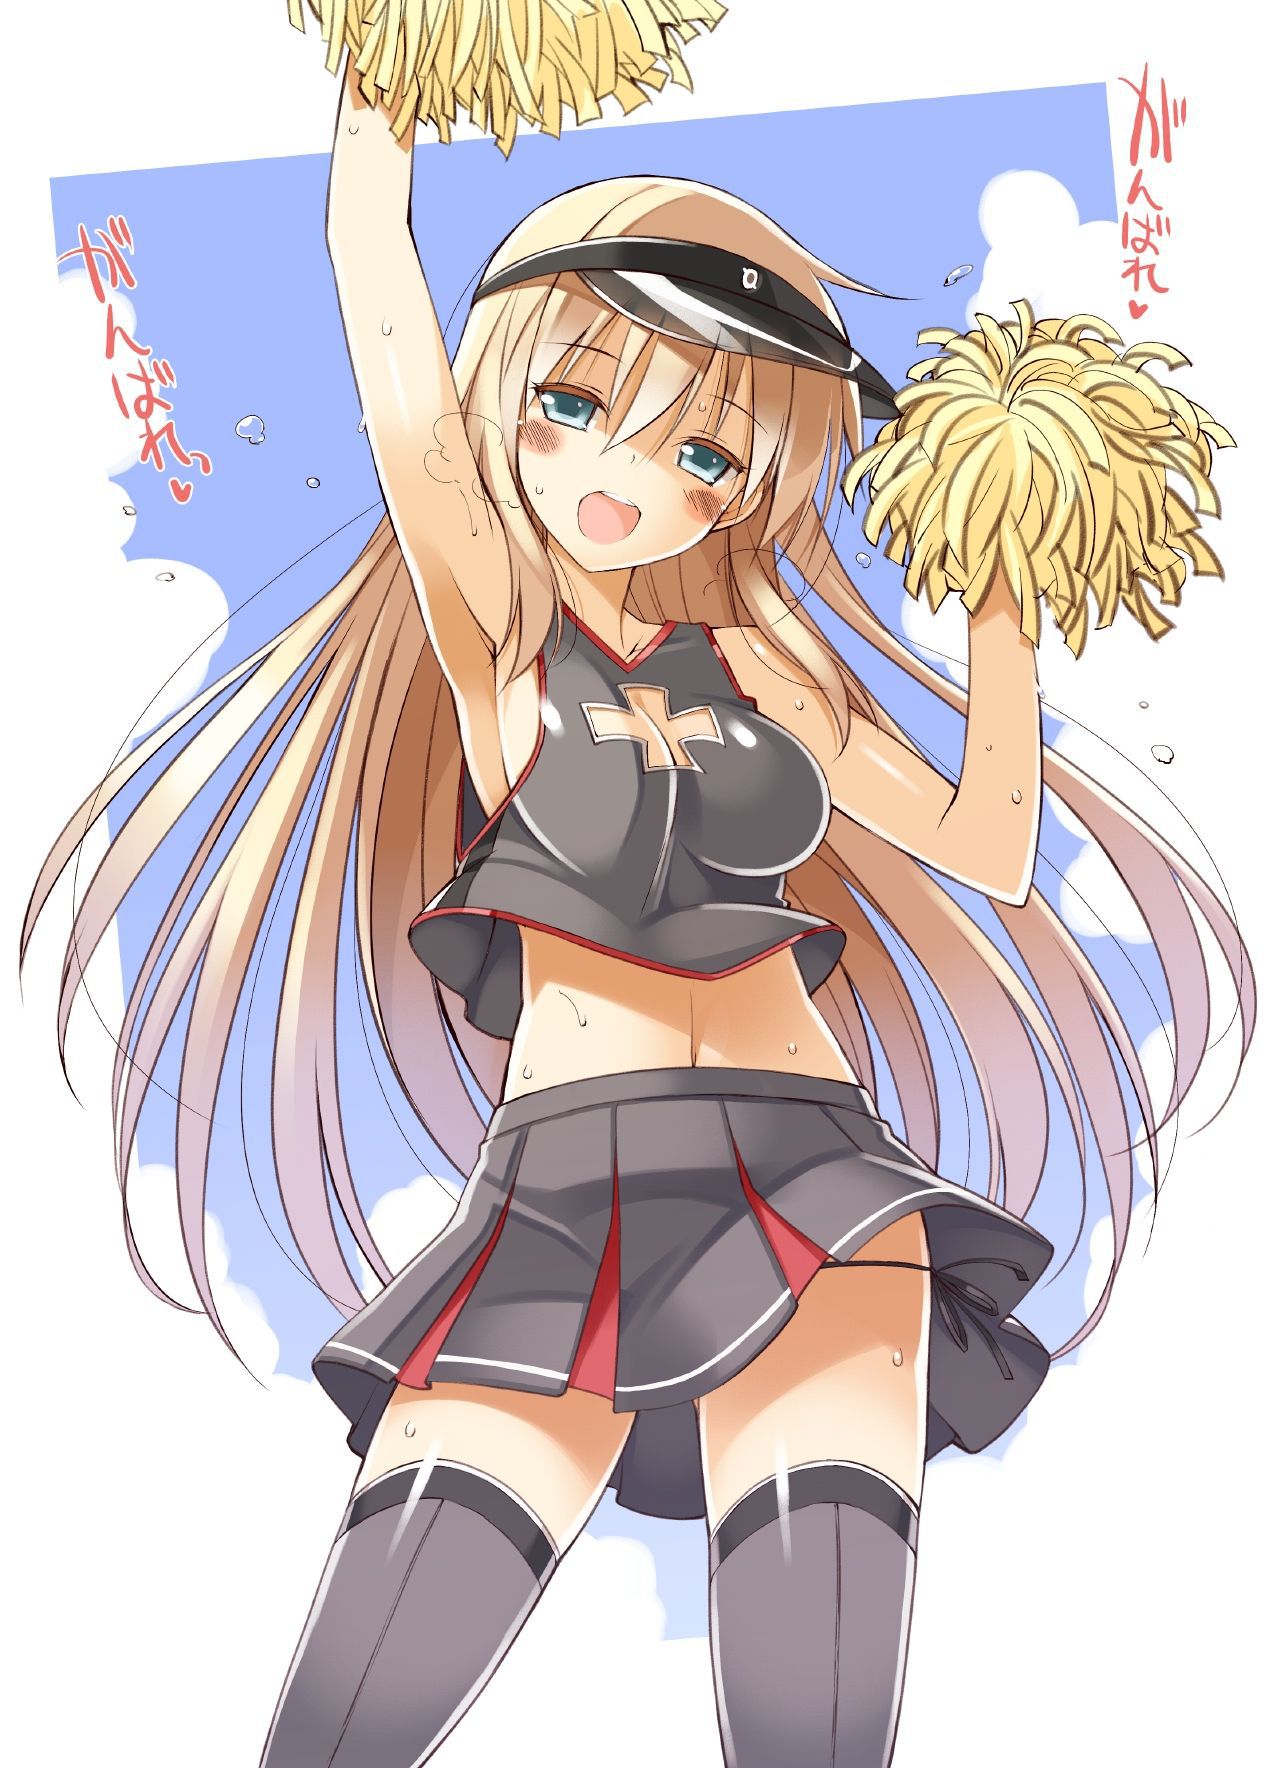 [Image] "ship this ' of warship daughter sexy cuteness is abnormal wwwwwwwwwwww 66